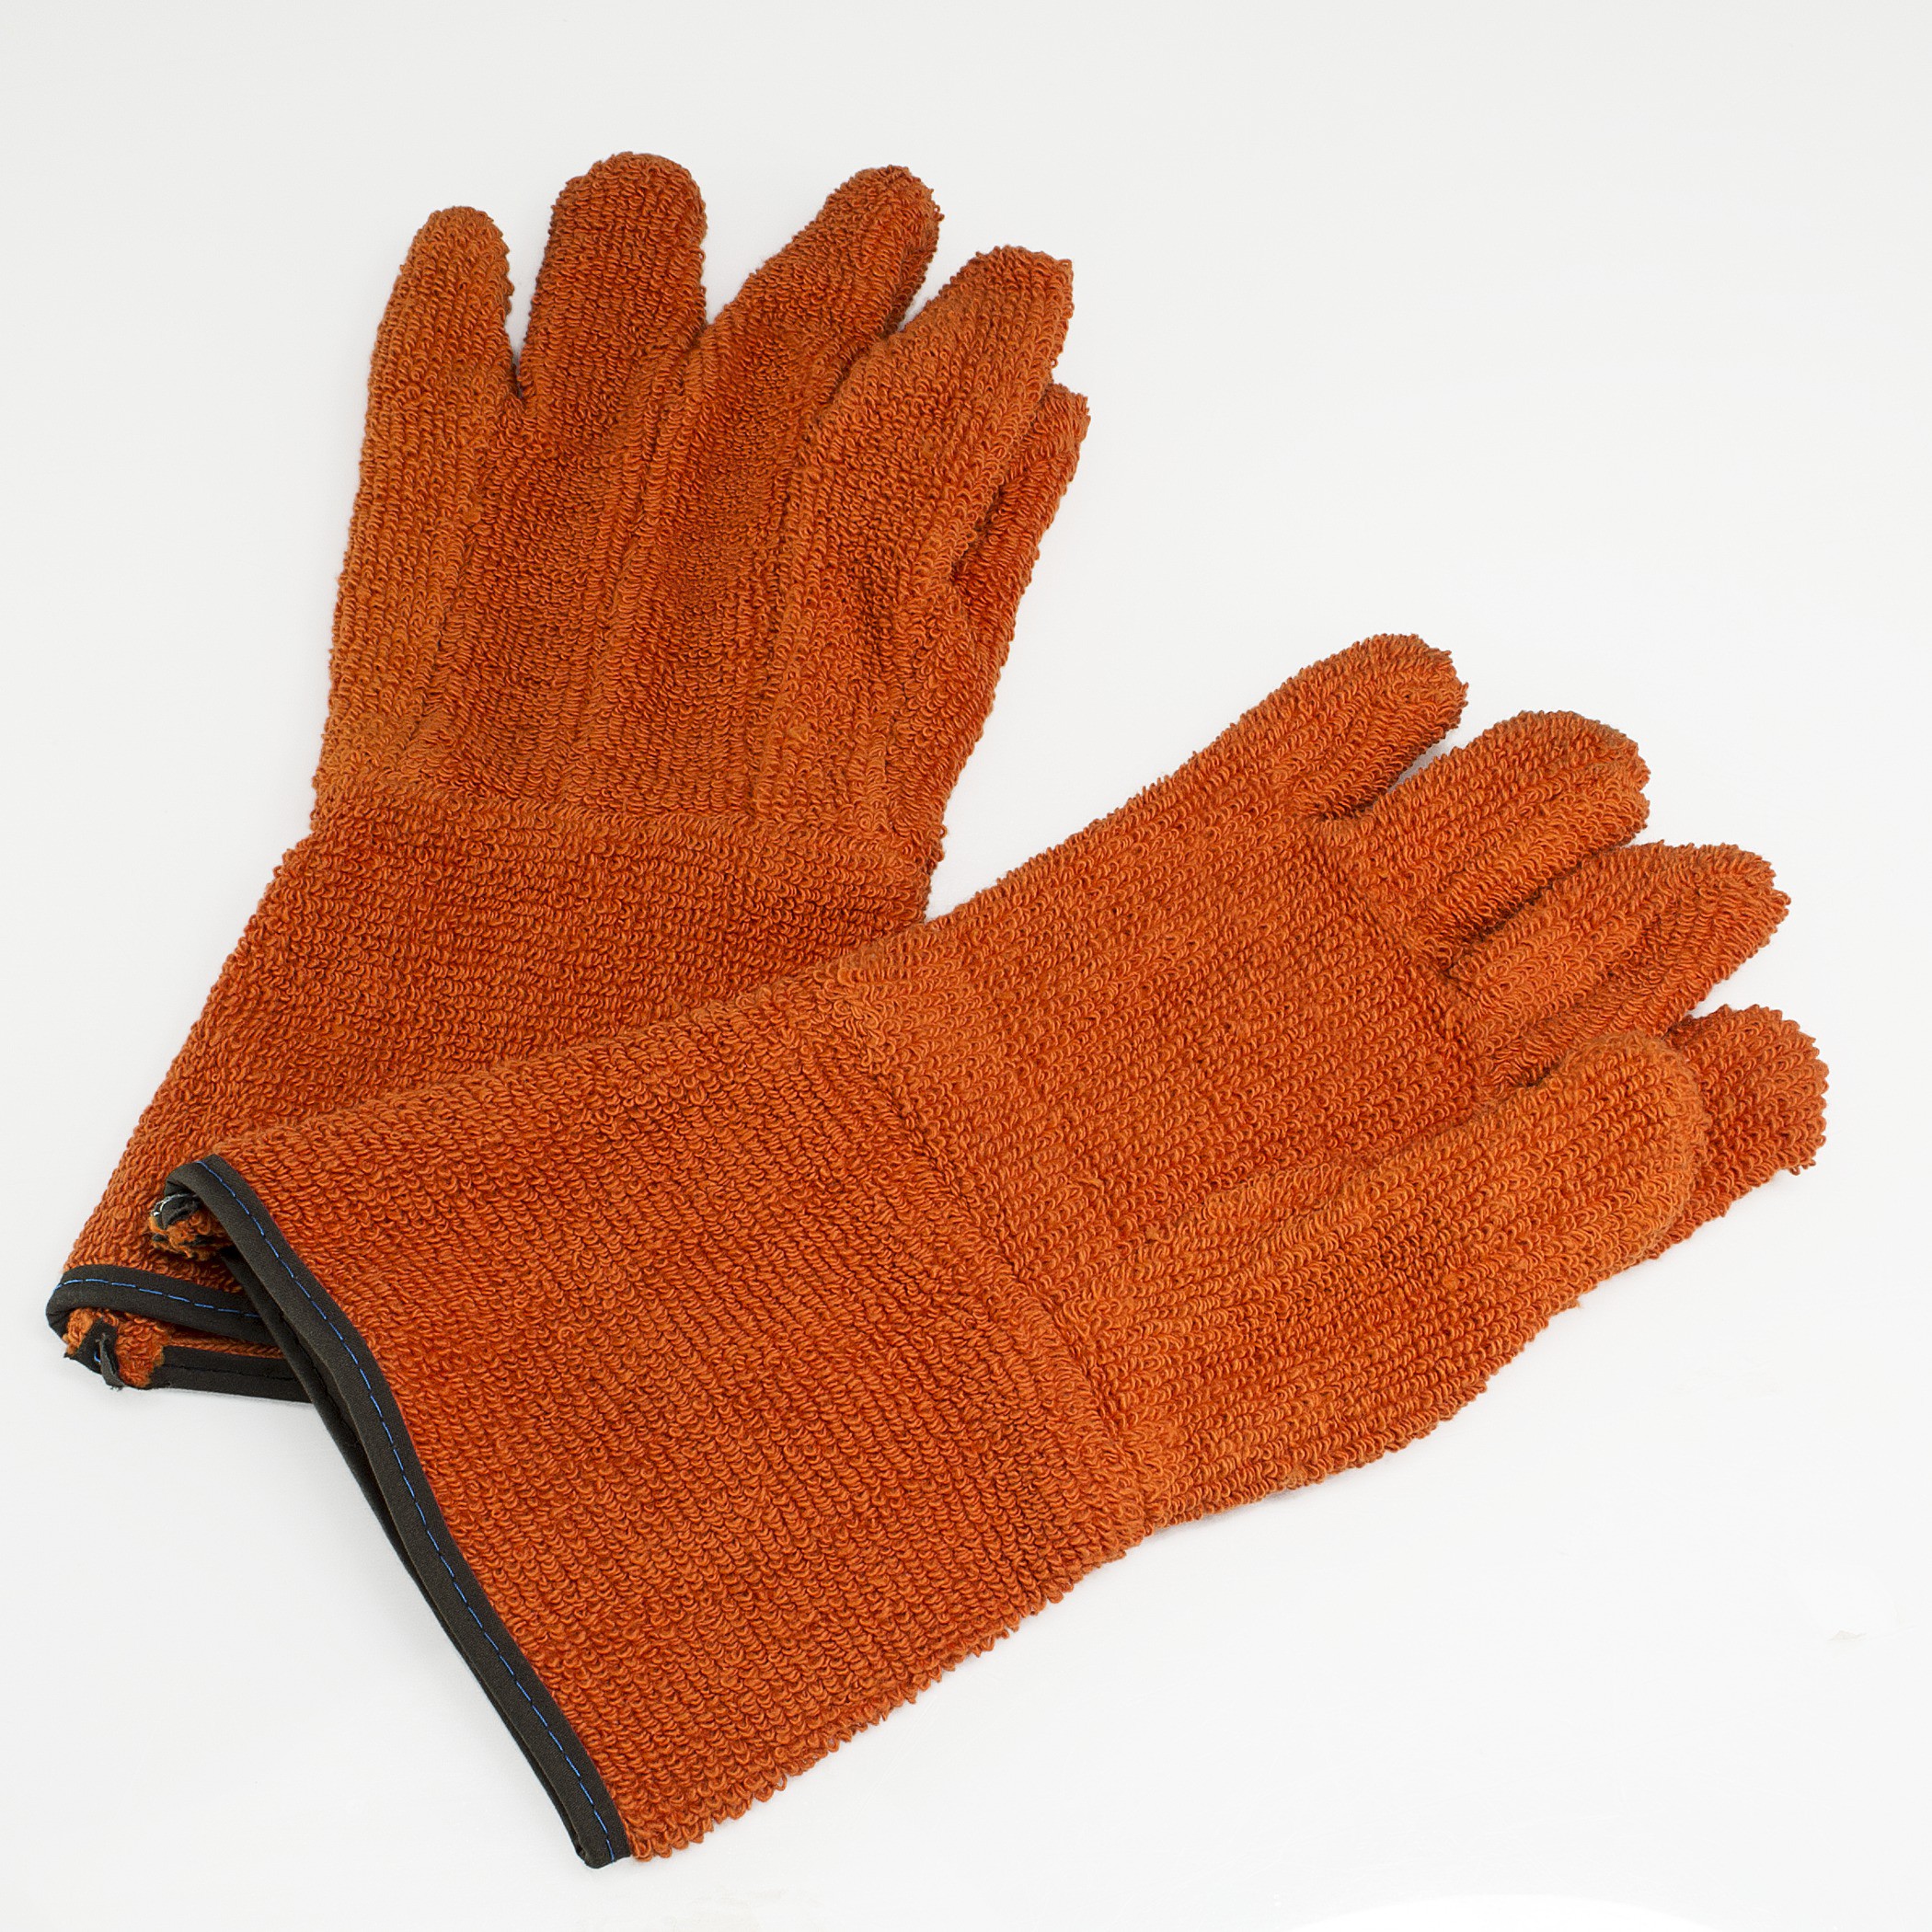 https://www.labsource.com/PHOTOS/media/catalog/product/autoclave%20oven%20gloves%20g11-103.jpg